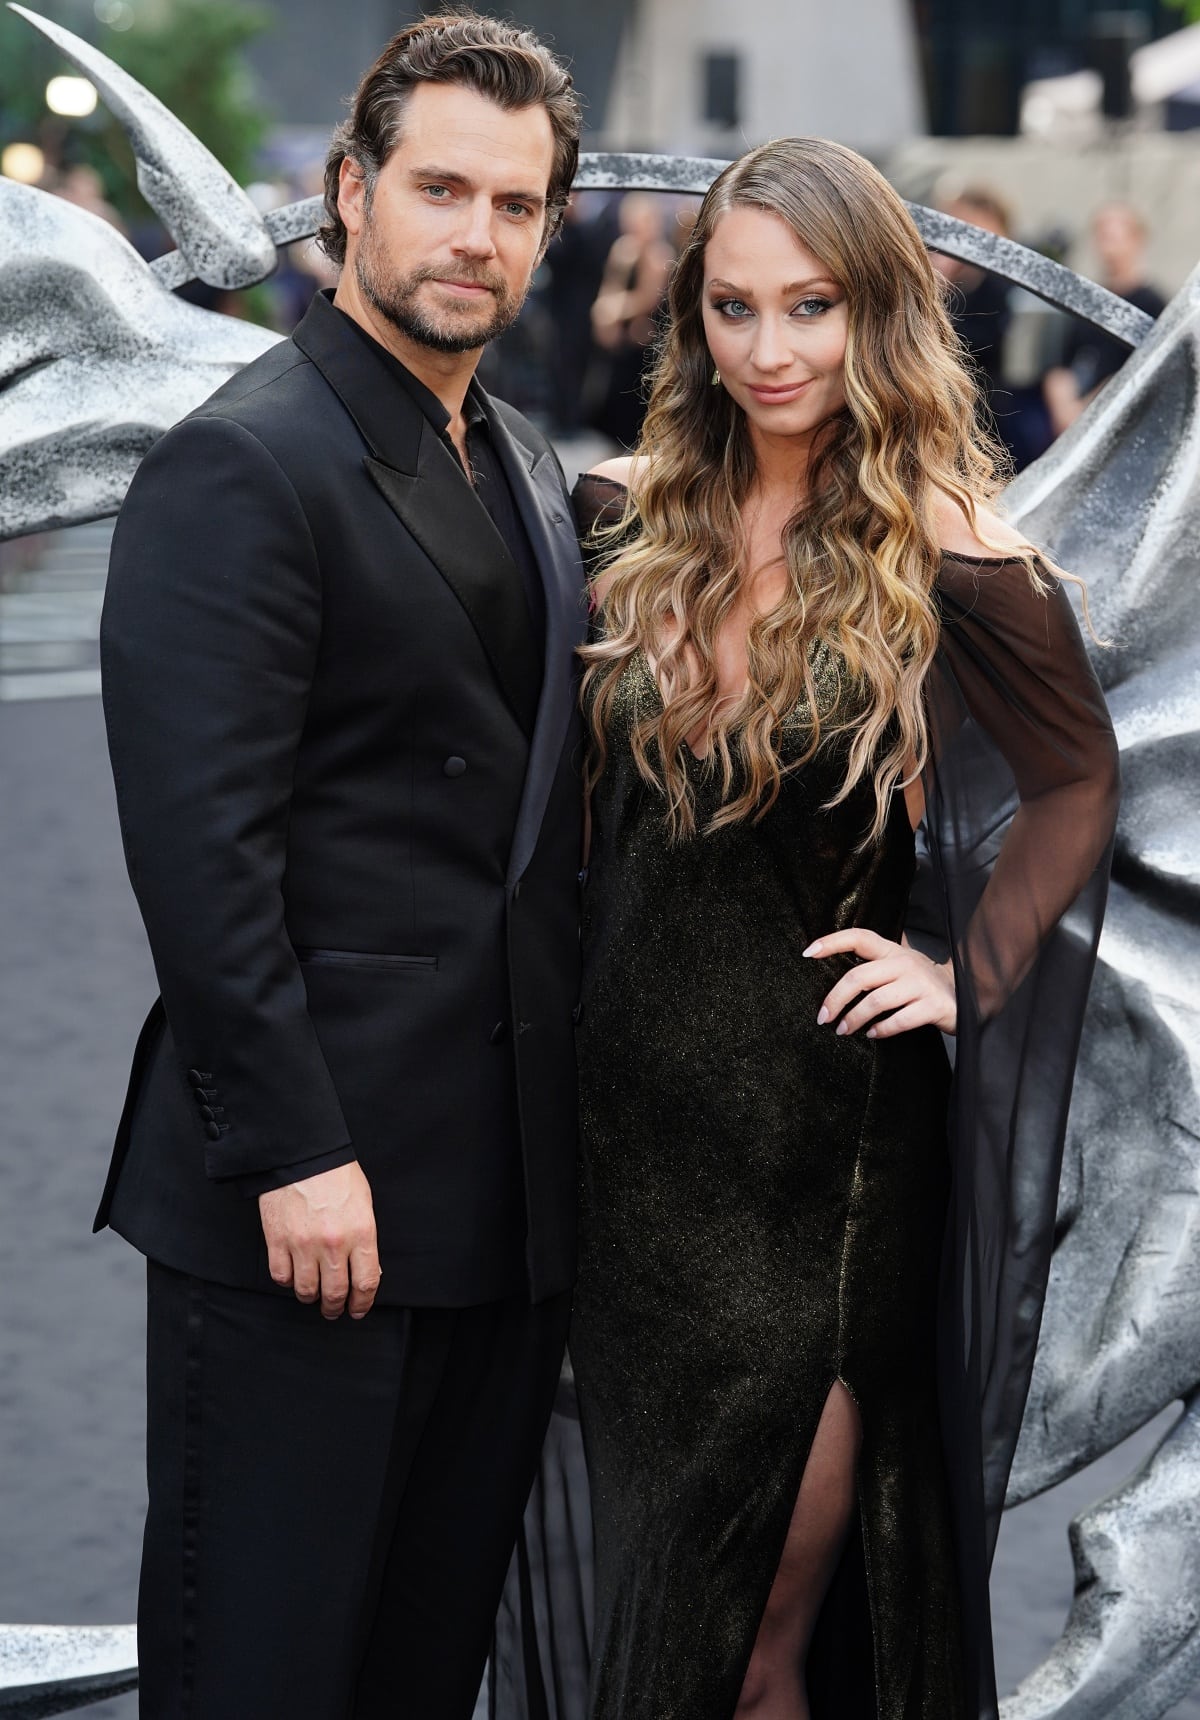 Henry Cavill and Natalie Viscuso making a stunning appearance at the UK premiere of The Witcher Season 3